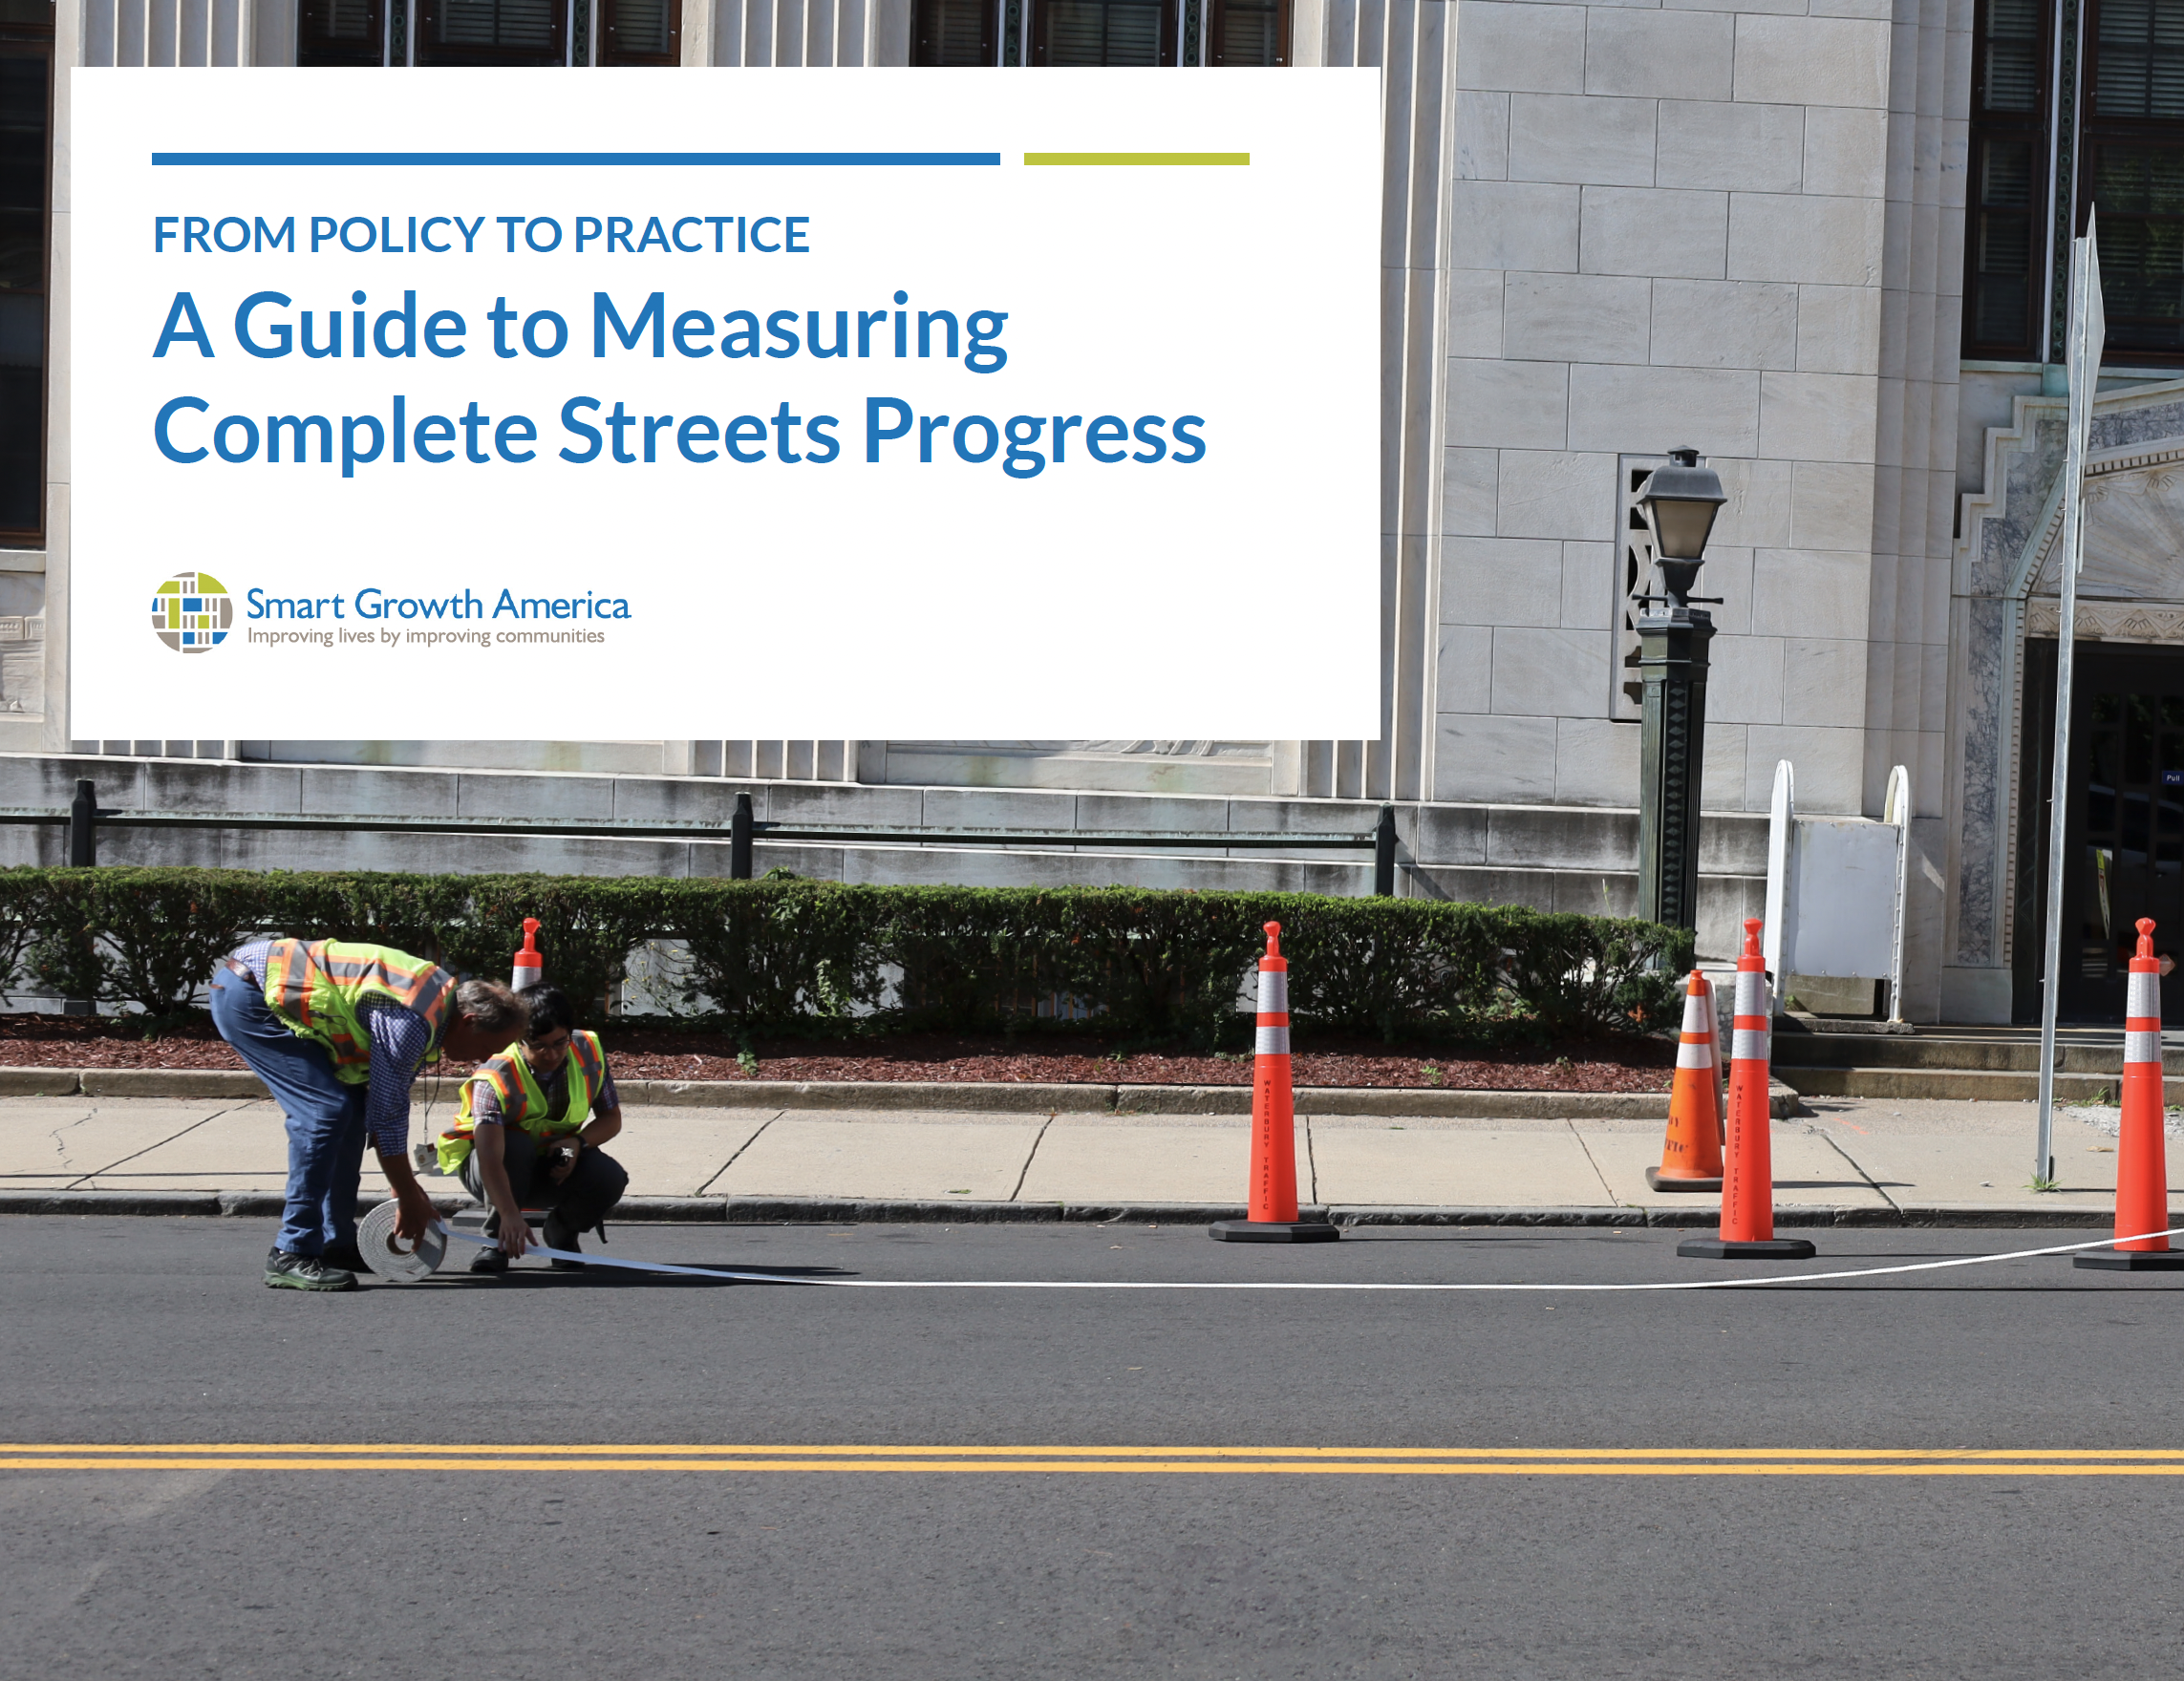 From Policy to Practice: A Guide to Measuring Complete Streets Progress